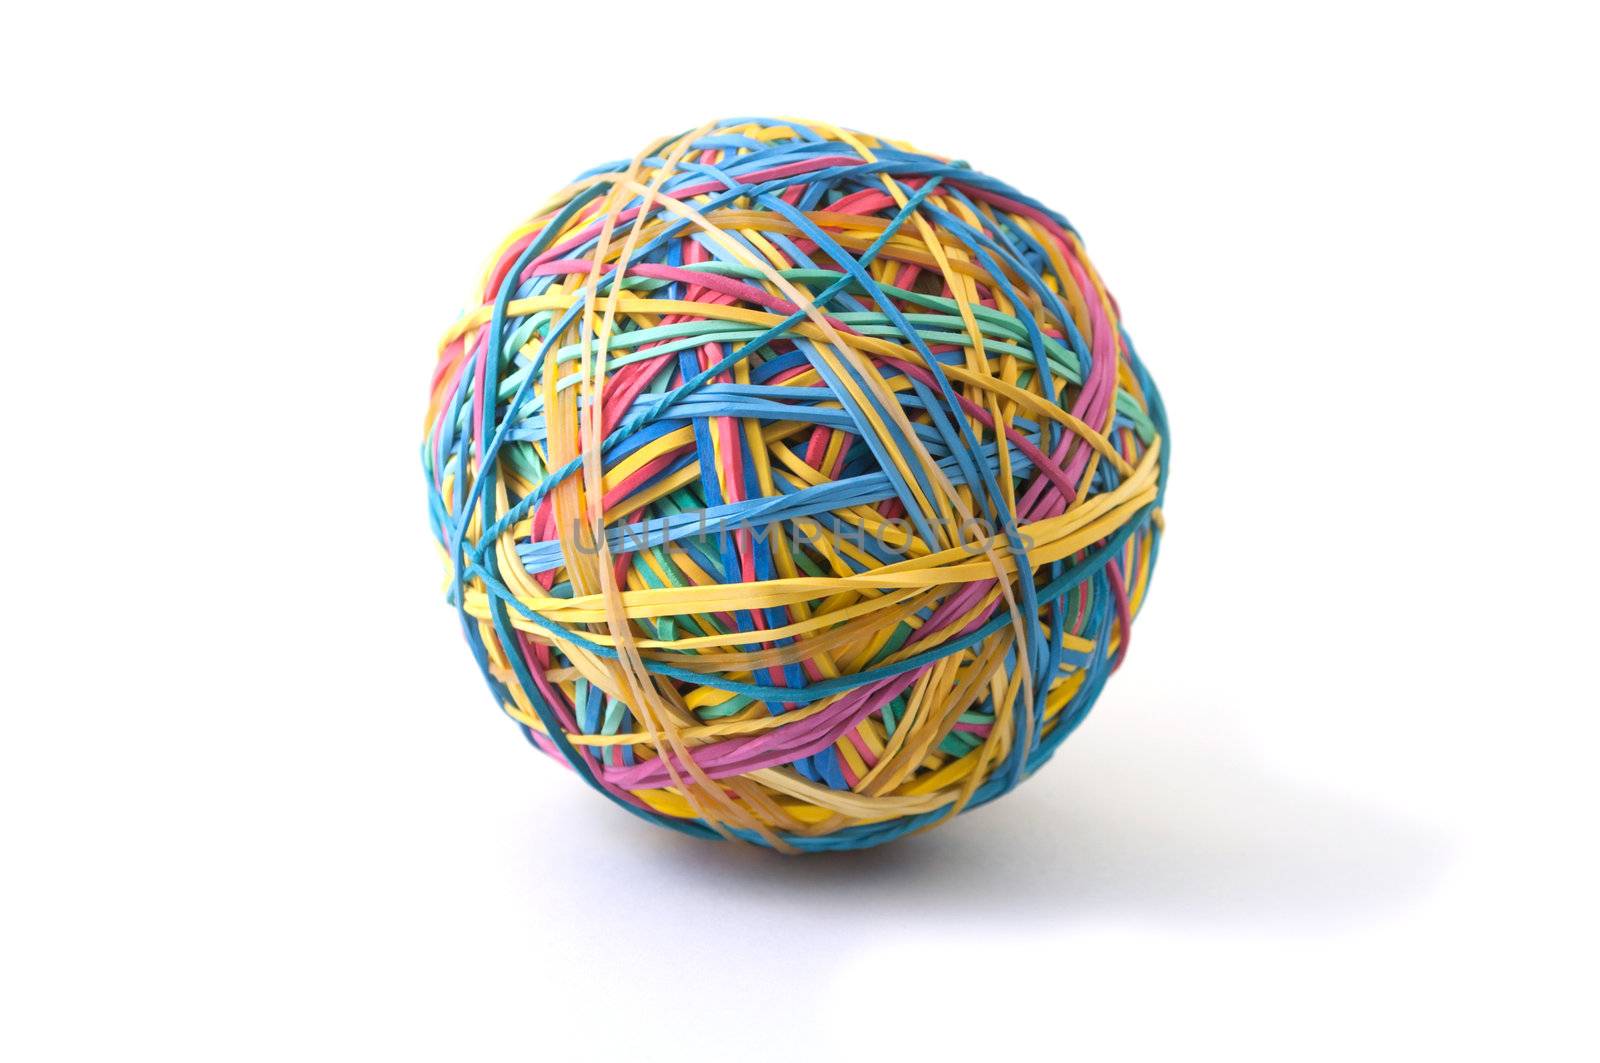 A ball made of rubber bands isolated on white